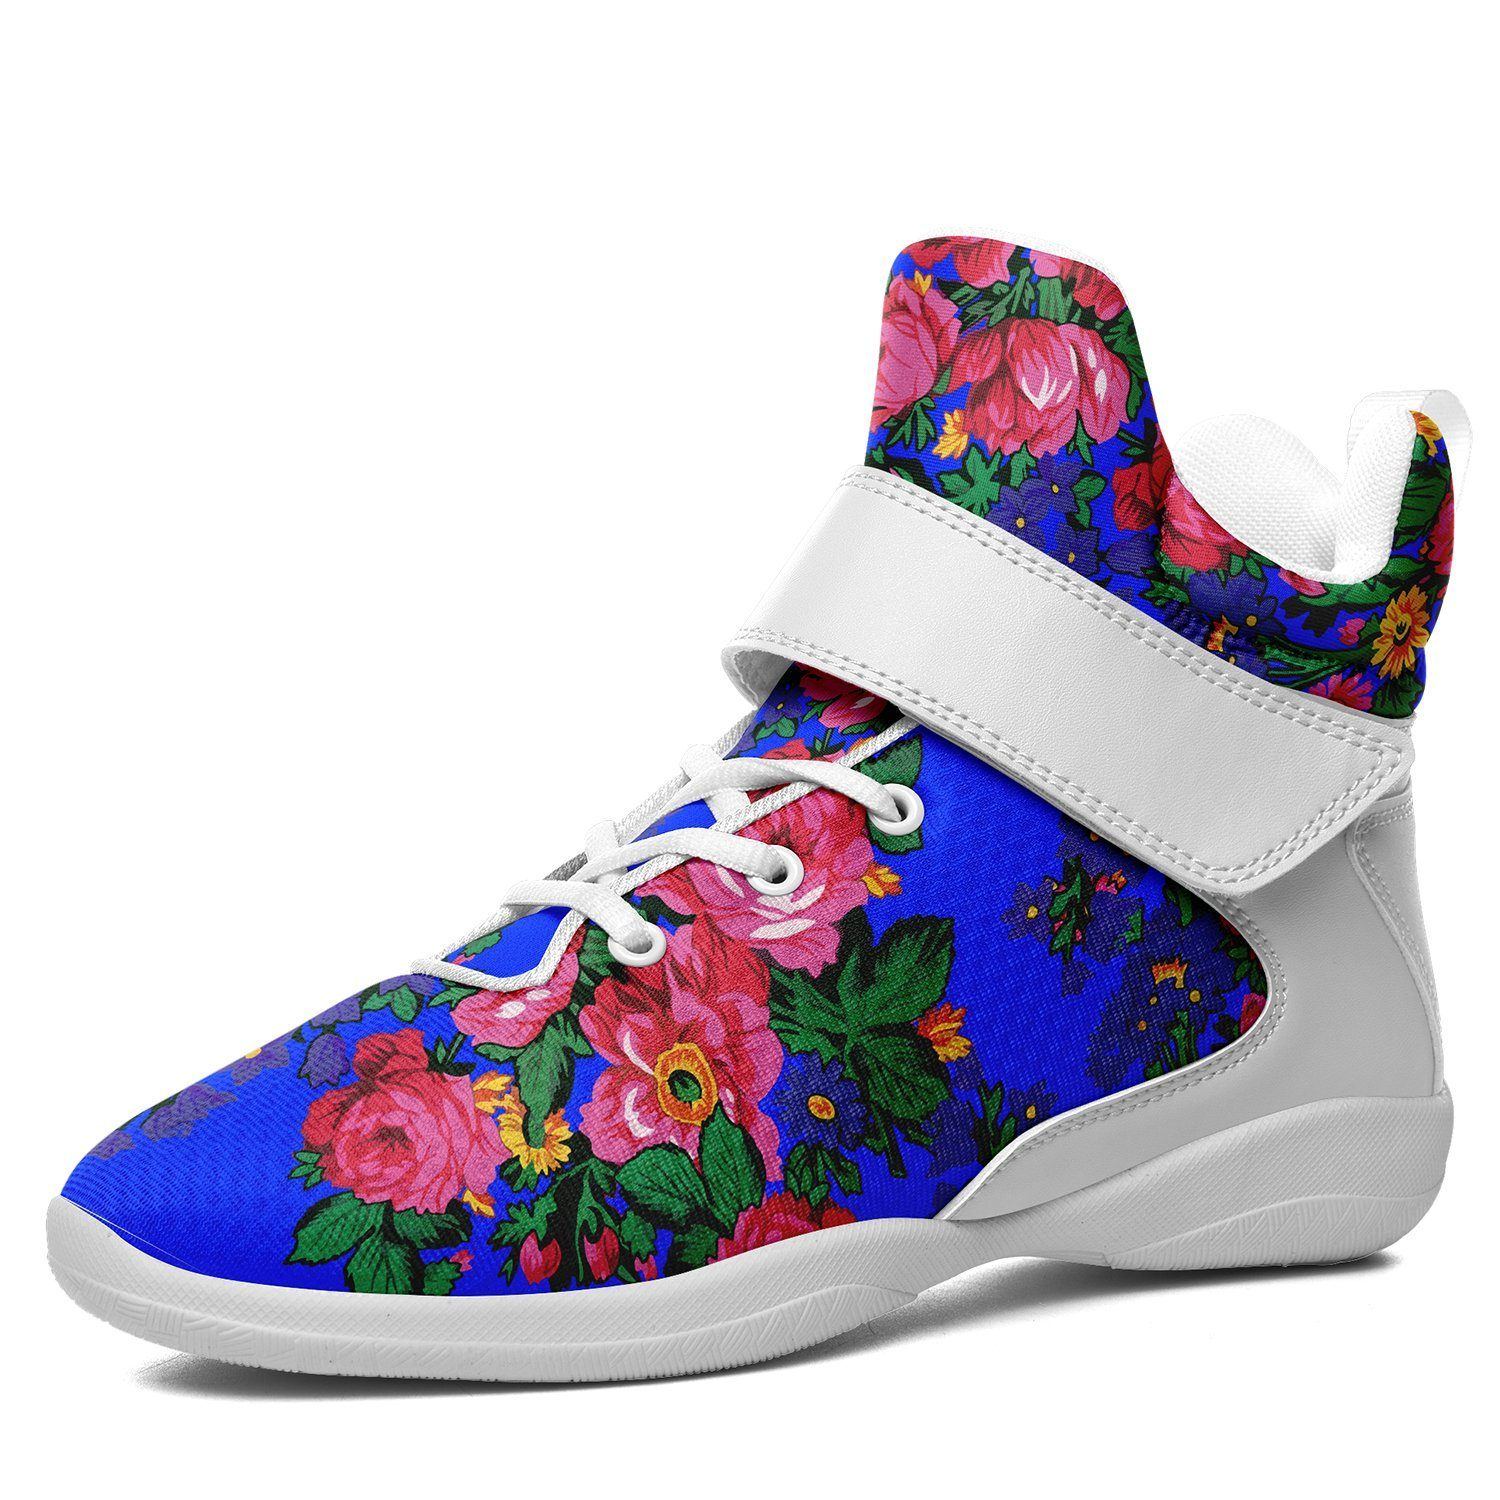 Kokum's Revenge Royal Kid's Ipottaa Basketball / Sport High Top Shoes 49 Dzine US Women 4.5 / US Youth 3.5 / EUR 35 White Sole with White Strap 